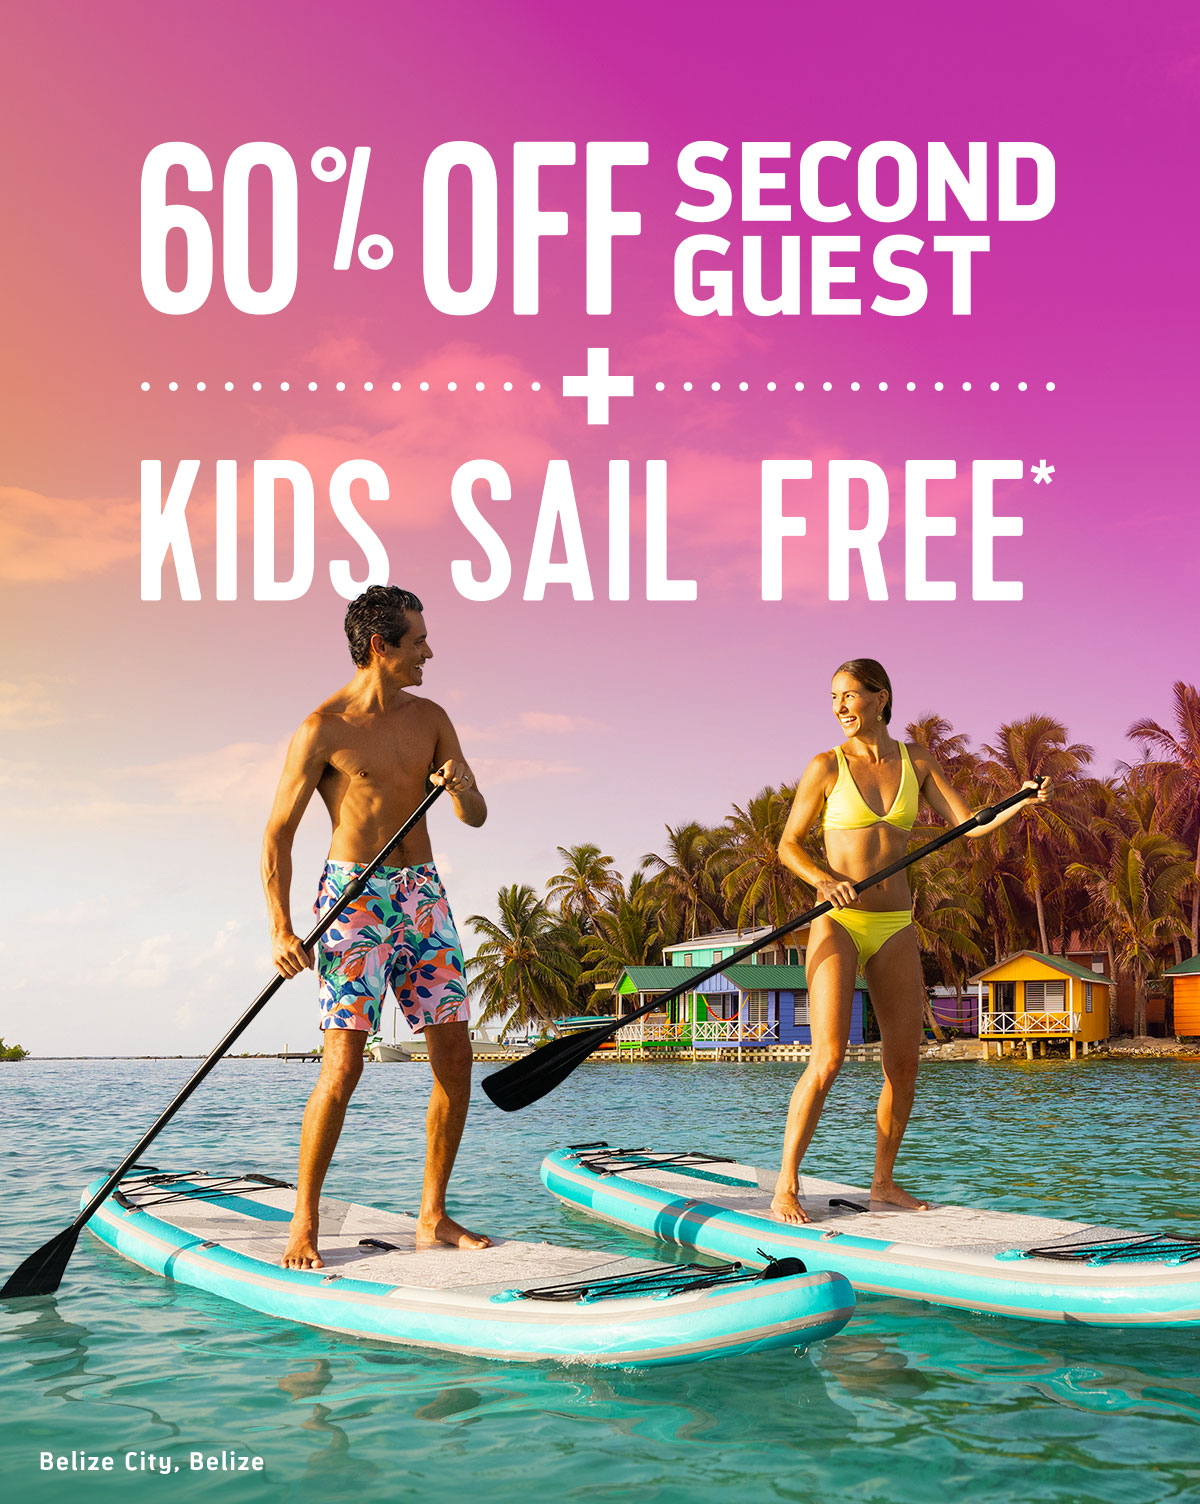 60% OFF Second Guest + Kids Sail Free